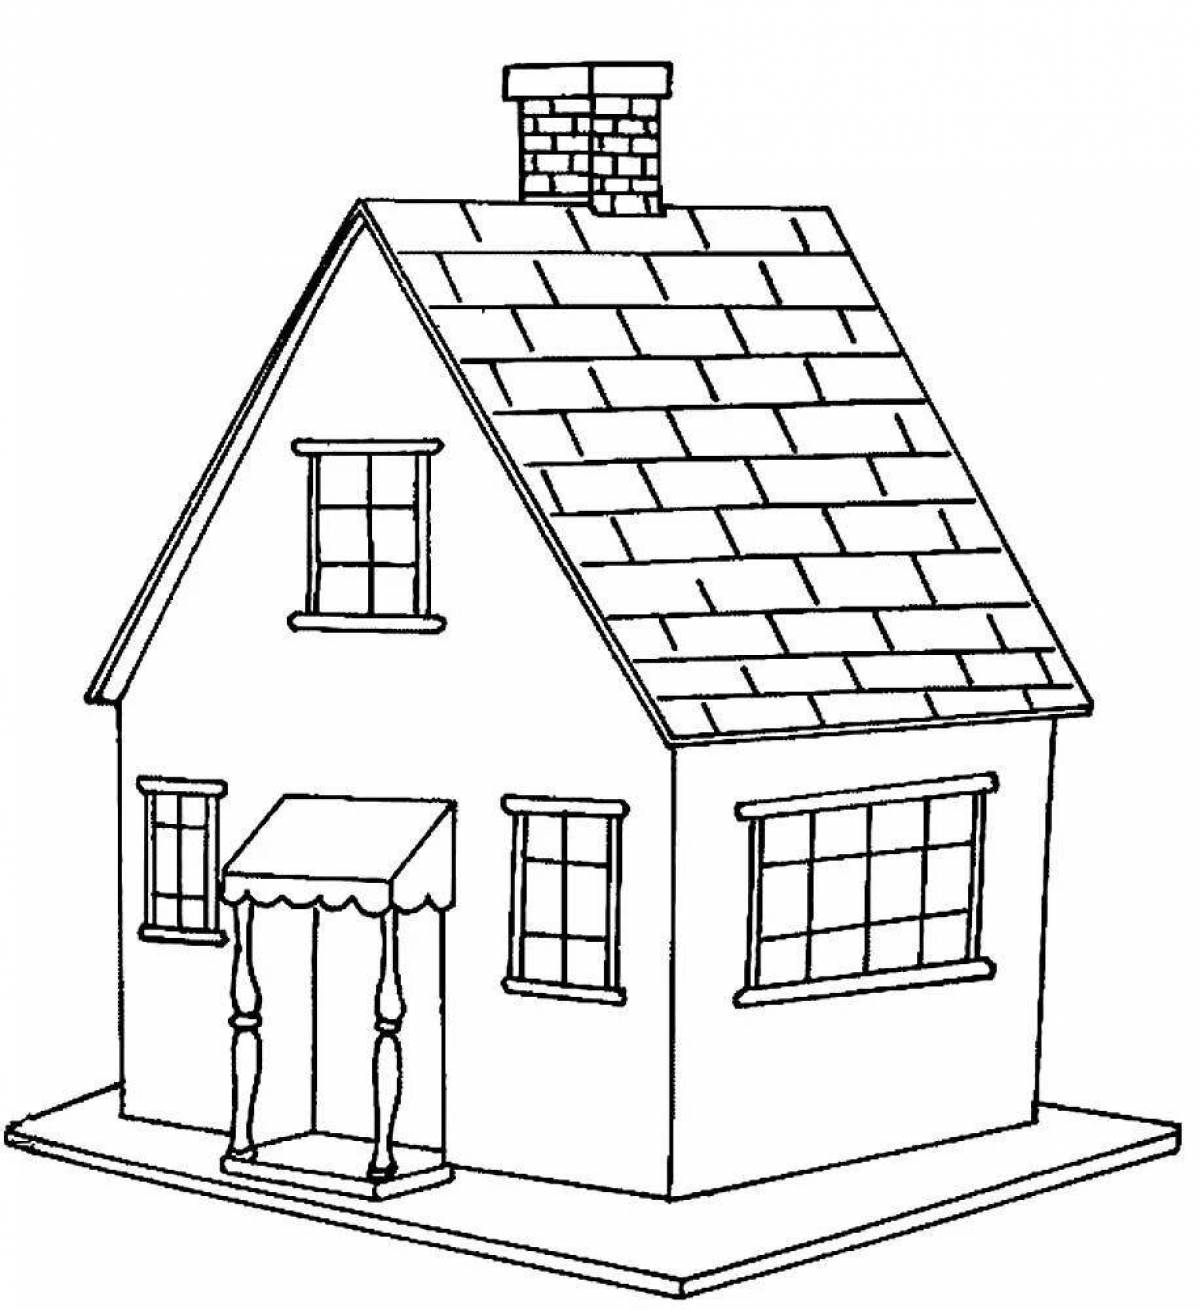 Beautiful drawing of a house